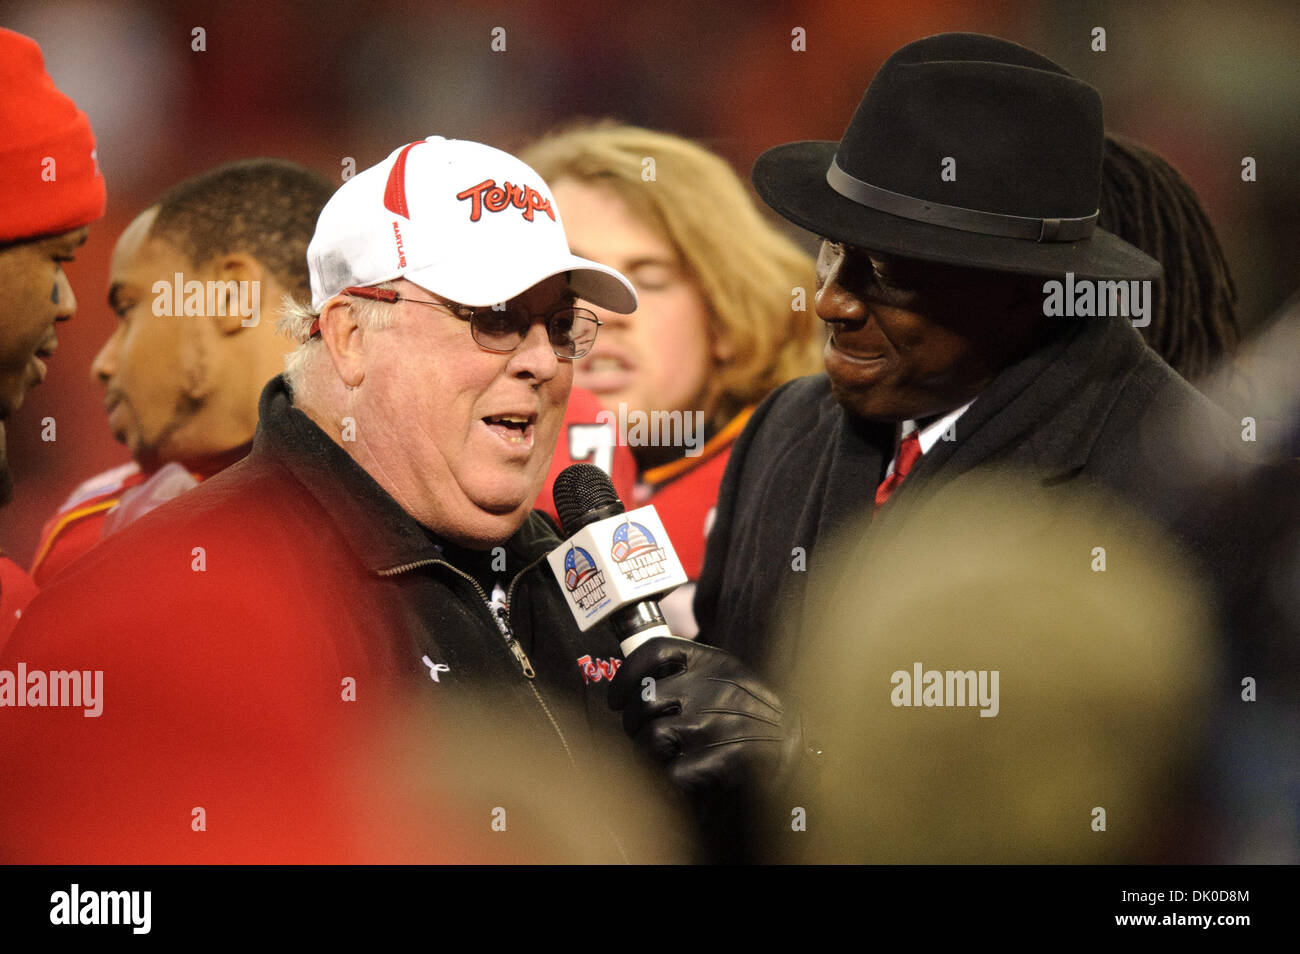 Dec. 29, 2010 - Washington, DC, U.S - Outgoing Head Coach of Maryland Ralph Friedgen talks with Doc Walker after receiving the trophy after the 2010 Military Bowl at RFK Stadium in Washington. DC. Maryland defeated East Carolina 51-20. (Credit Image: © Rassi Borneo/Southcreek Global/ZUMAPRESS.com) Stock Photo